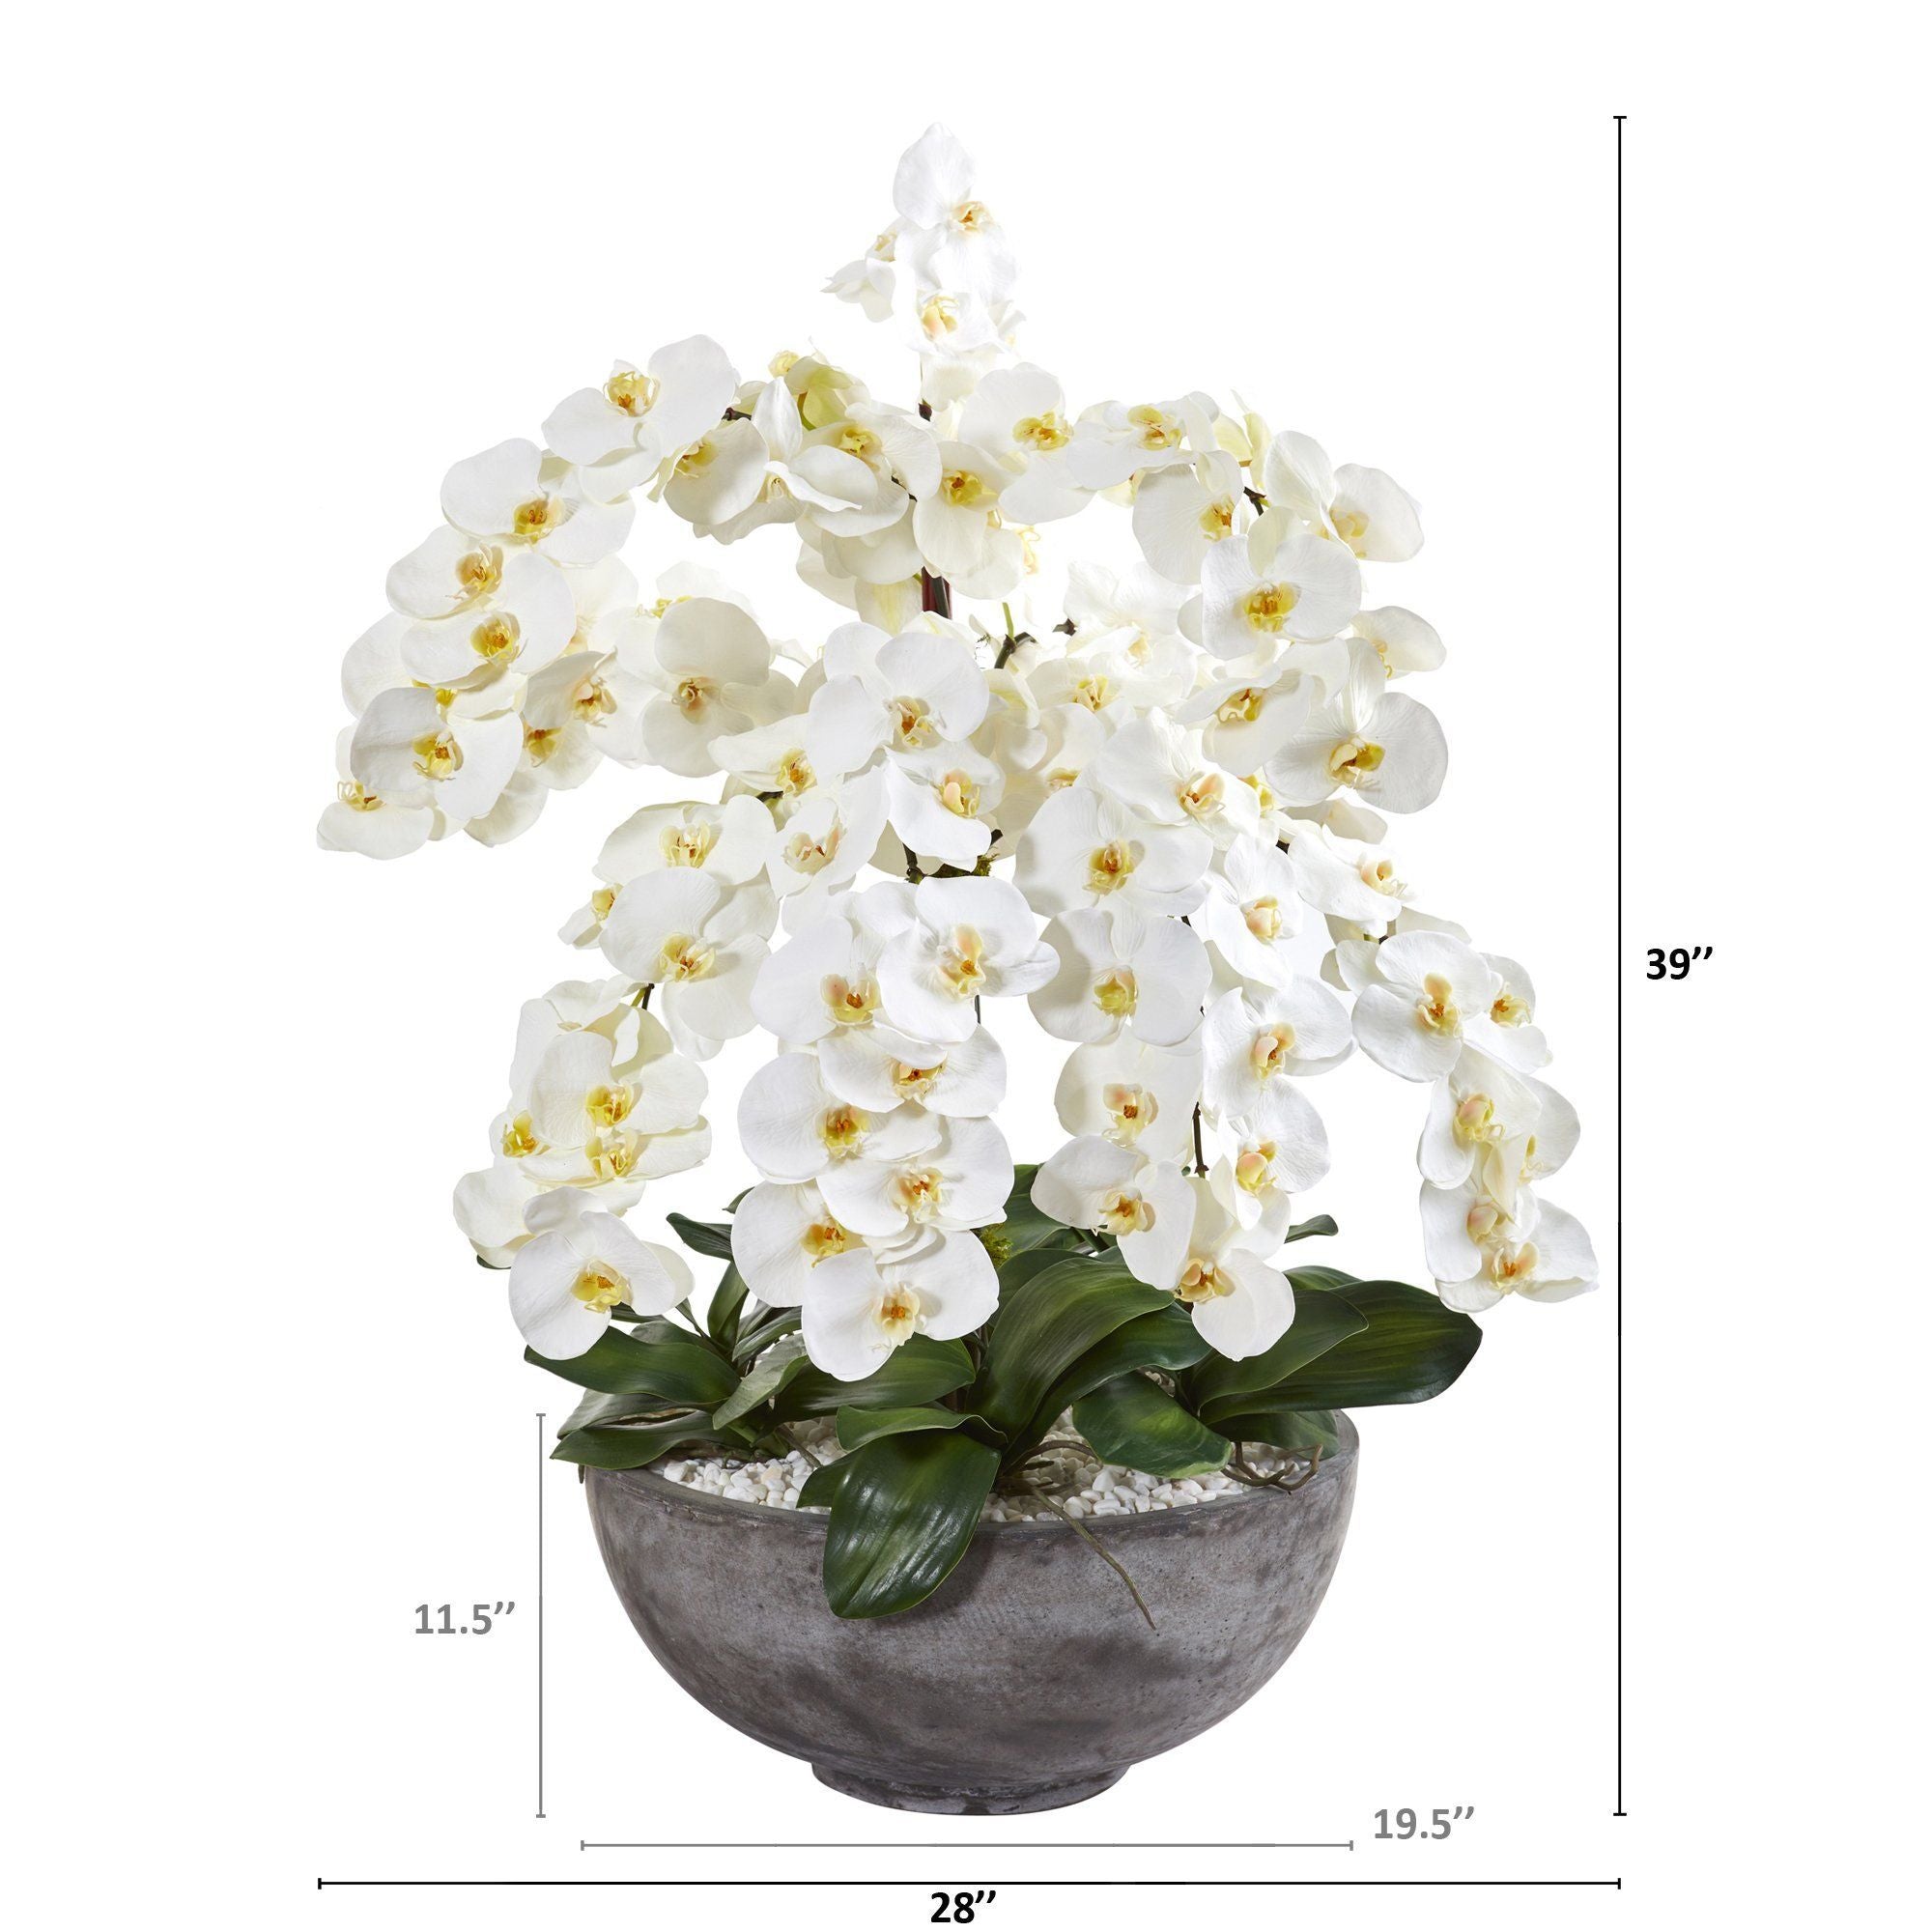 39” Phalaenopsis Orchid Artificial Arrangement in Large Cement Bowl ...